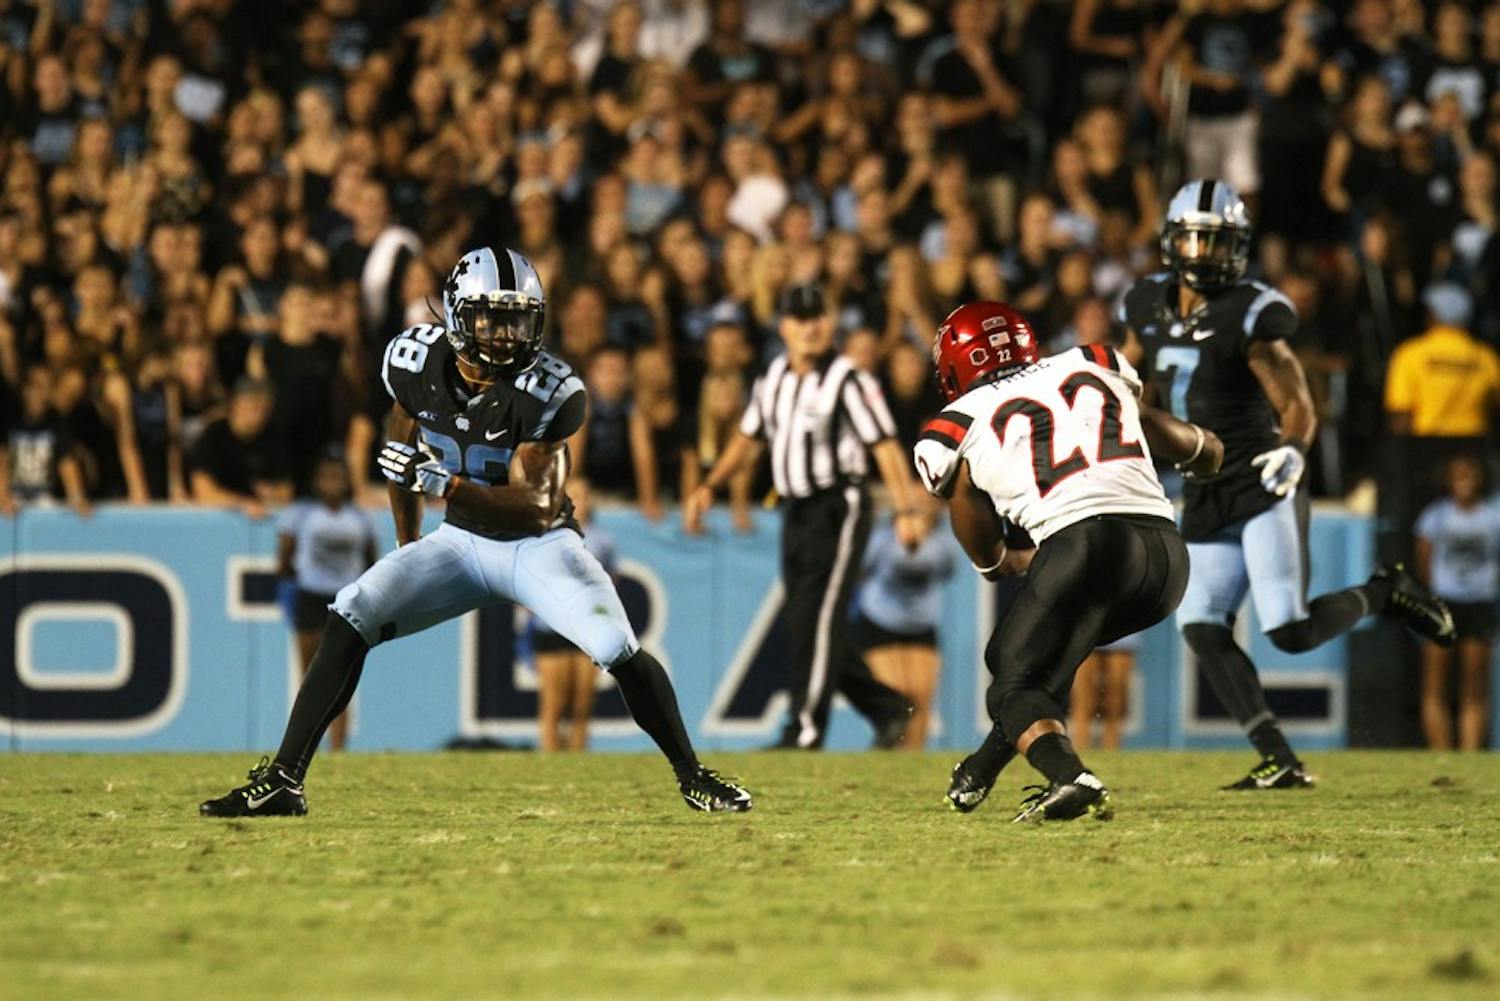 UNC cornerback Brian Walker (28) defends San Diego State's Kalan Montgomery (22).  Walker would go on to make the game saving interception late in the game.